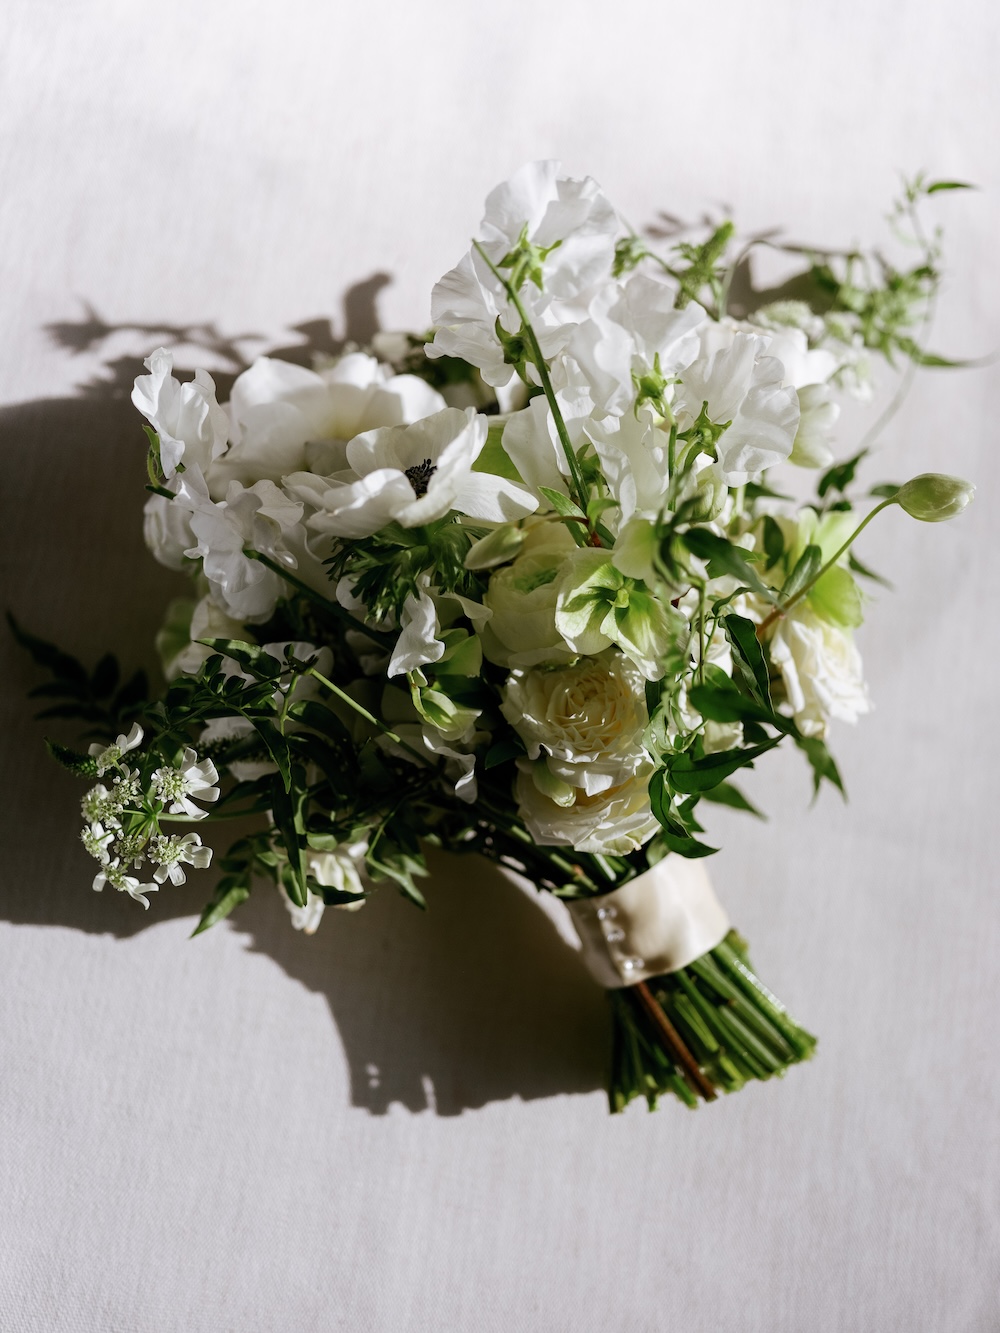 White and green bridal bouquet. Modern Washington DC wedding at National Museum of Women in the Arts. Sarah Bradshaw Photography.